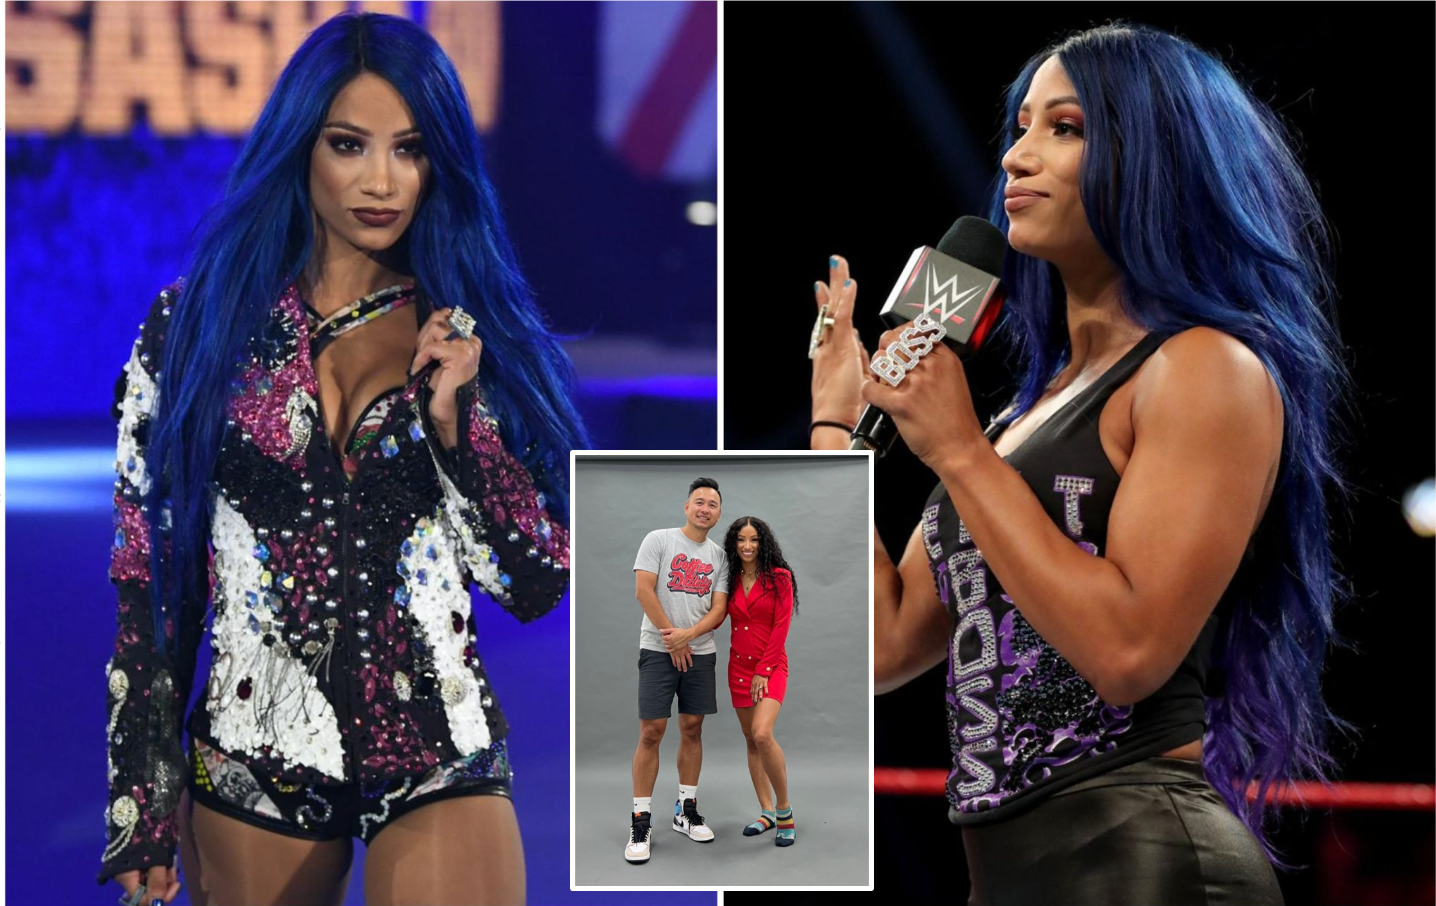 Sasha Banks has been snapped sporting another new look after WWE release reports